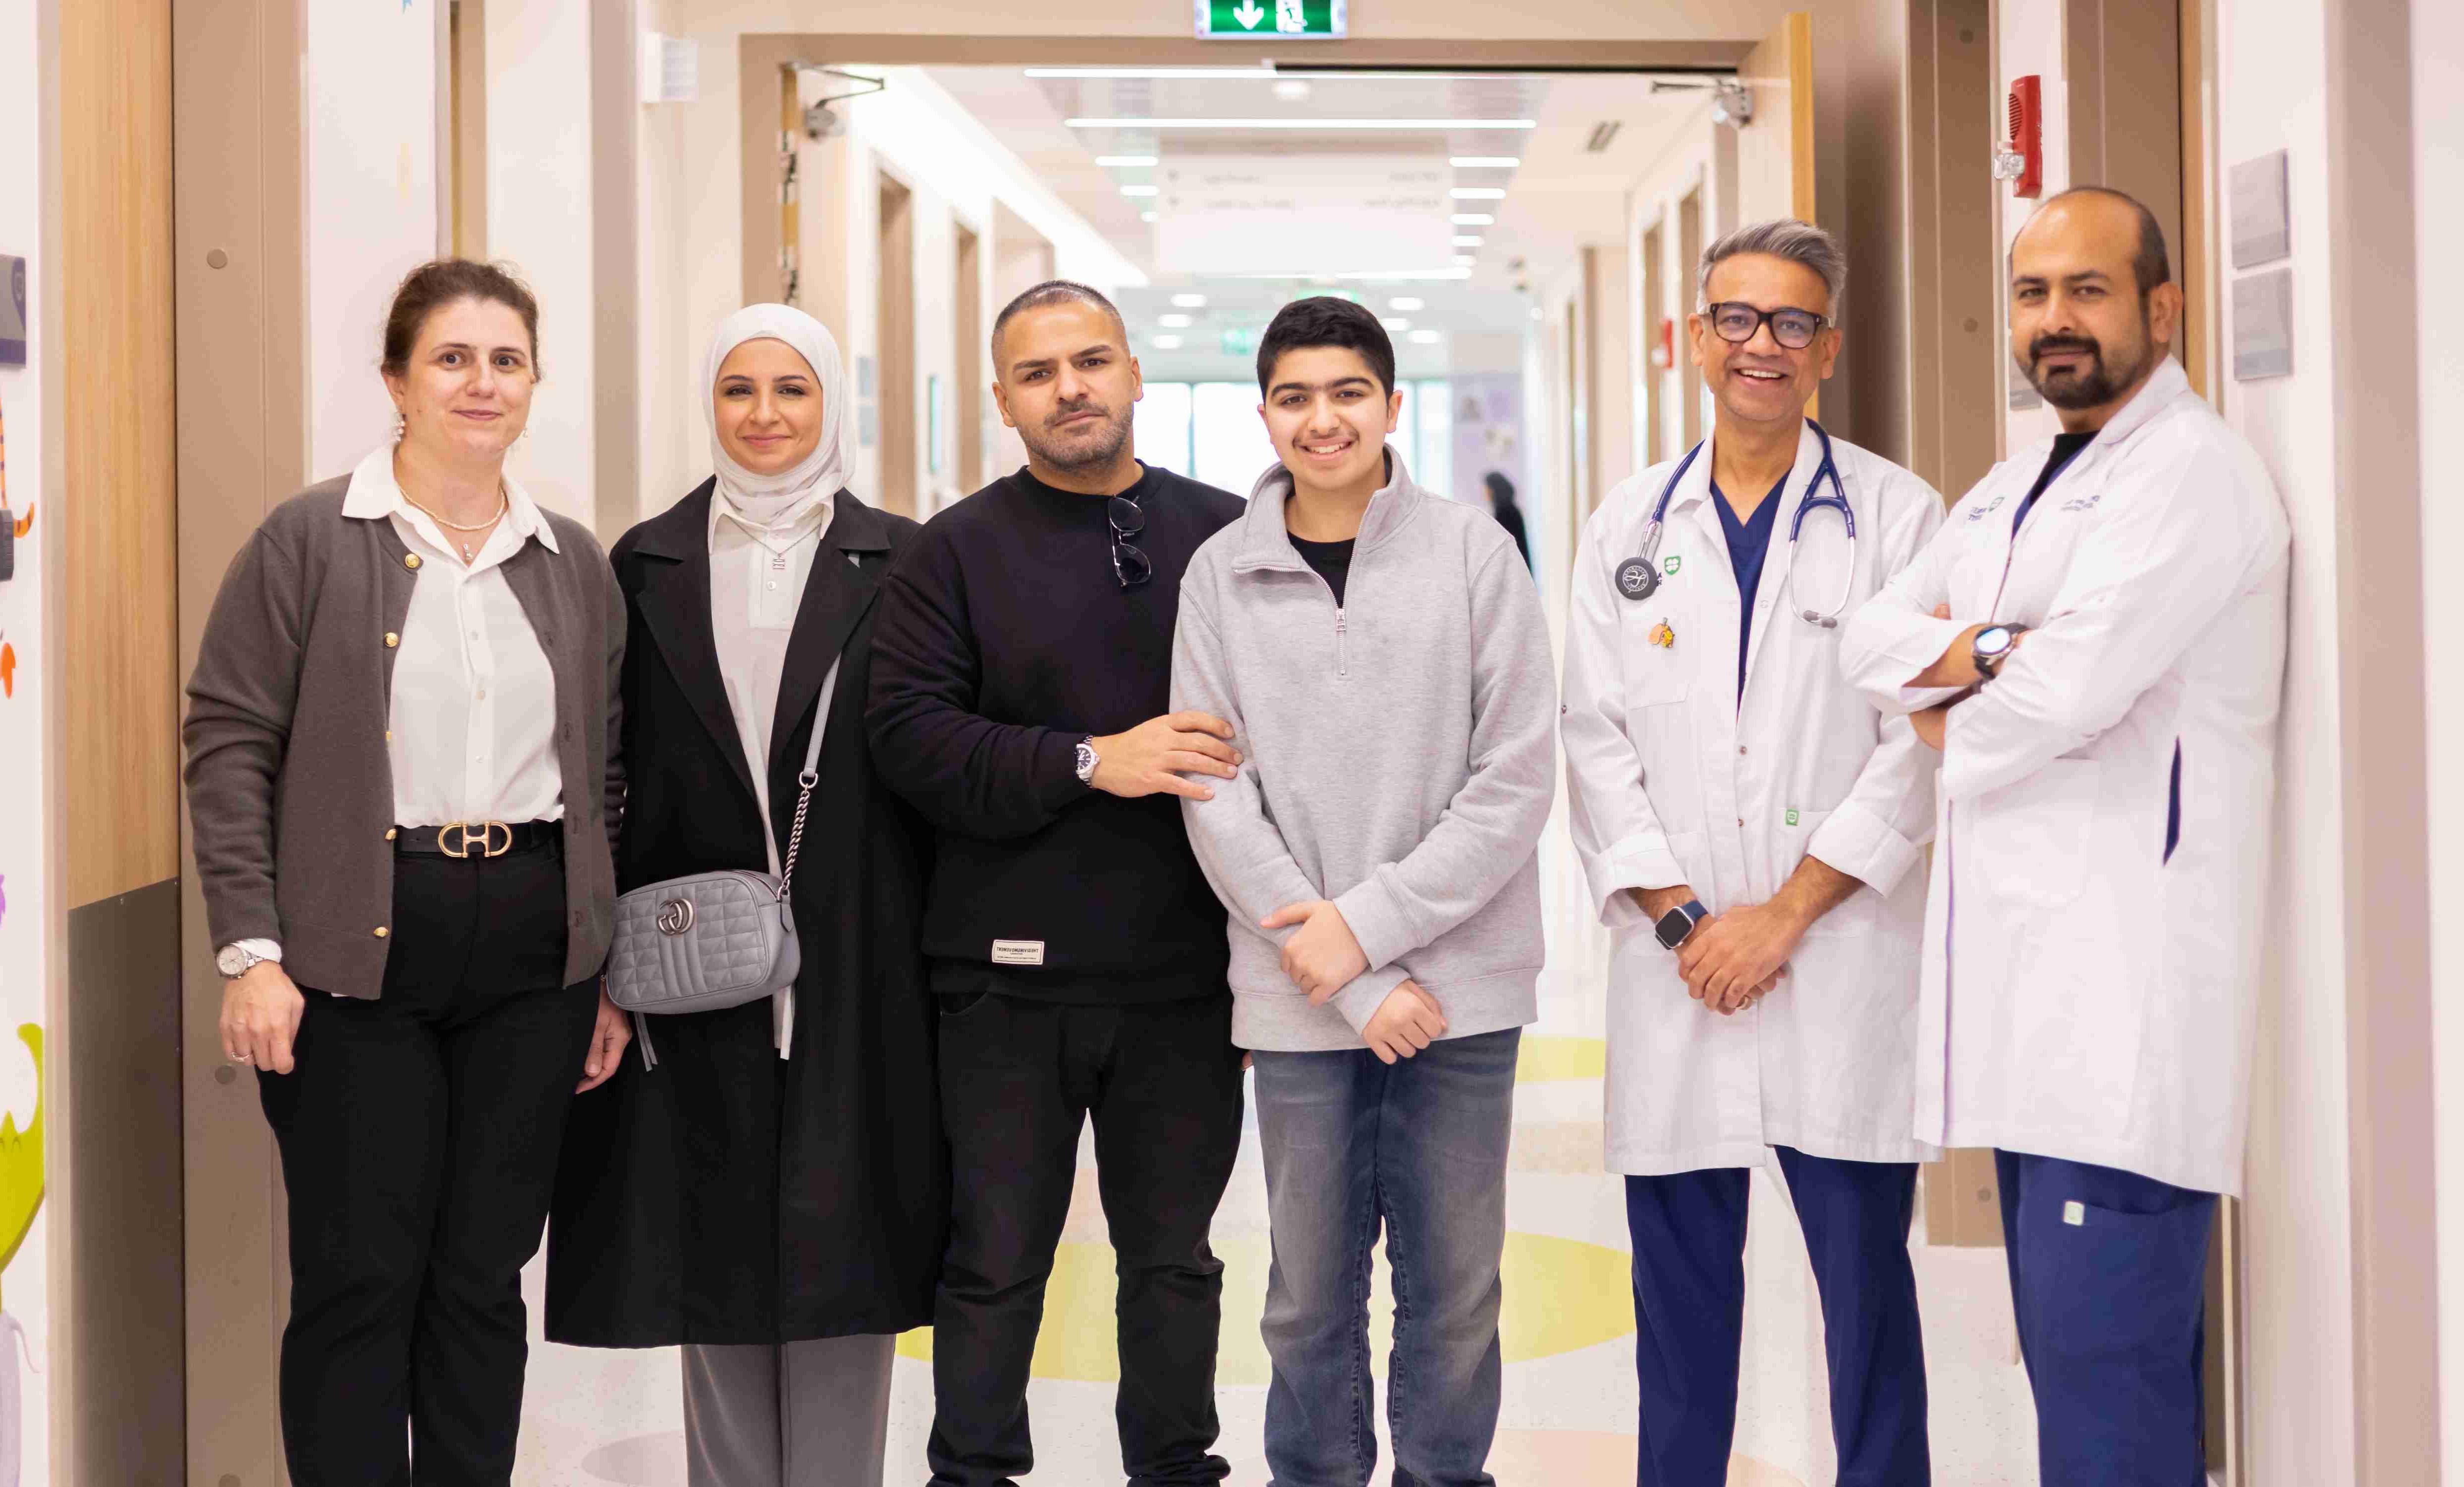 The right expertise and multi- disciplinary care at American Hospital Dubai helped a young Kuwaiti boy's life return to normal.